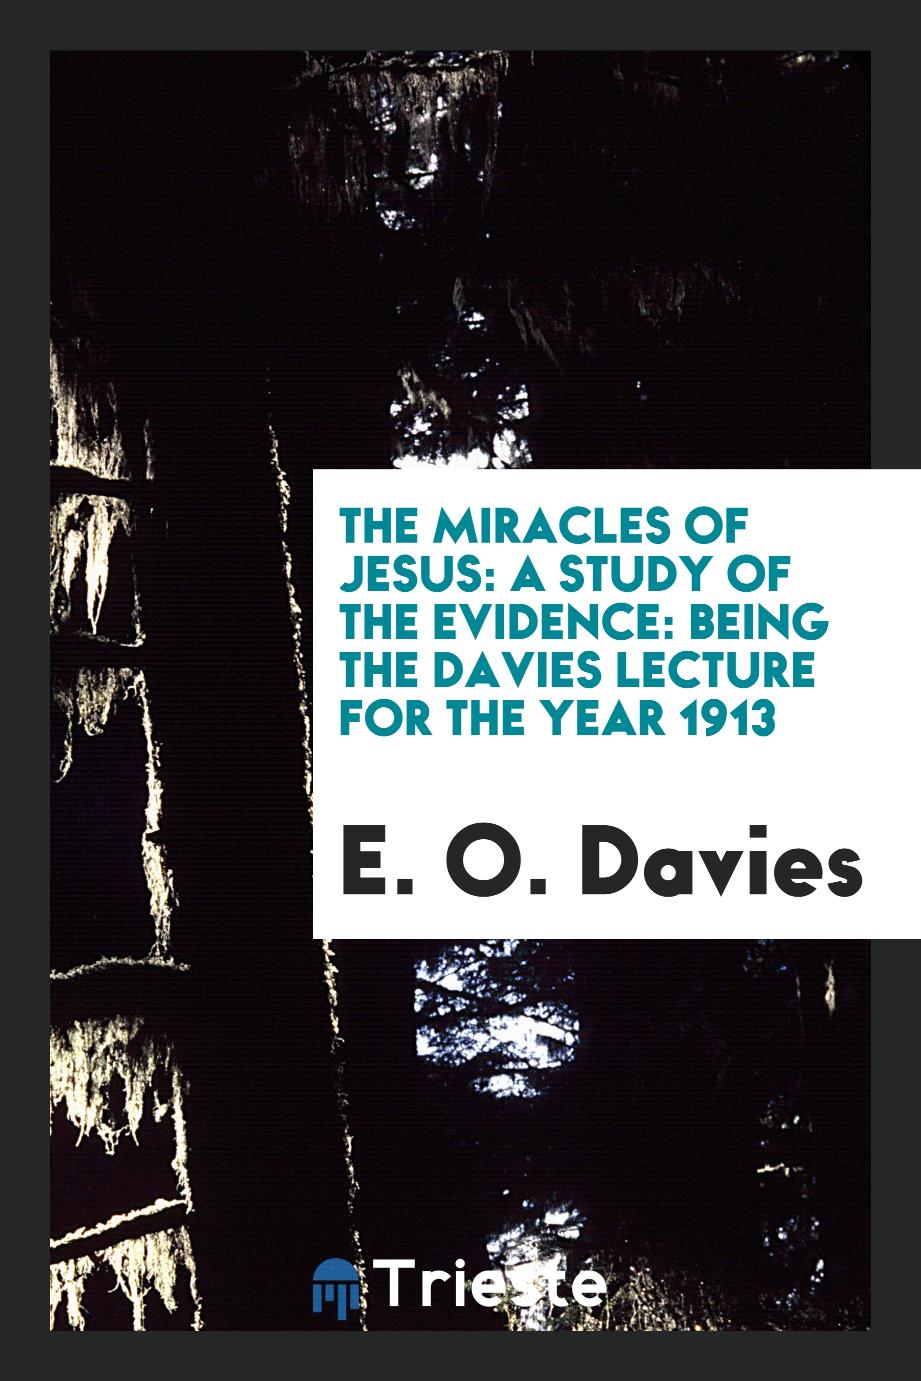 The miracles of Jesus: a study of the evidence: being the Davies lecture for the year 1913